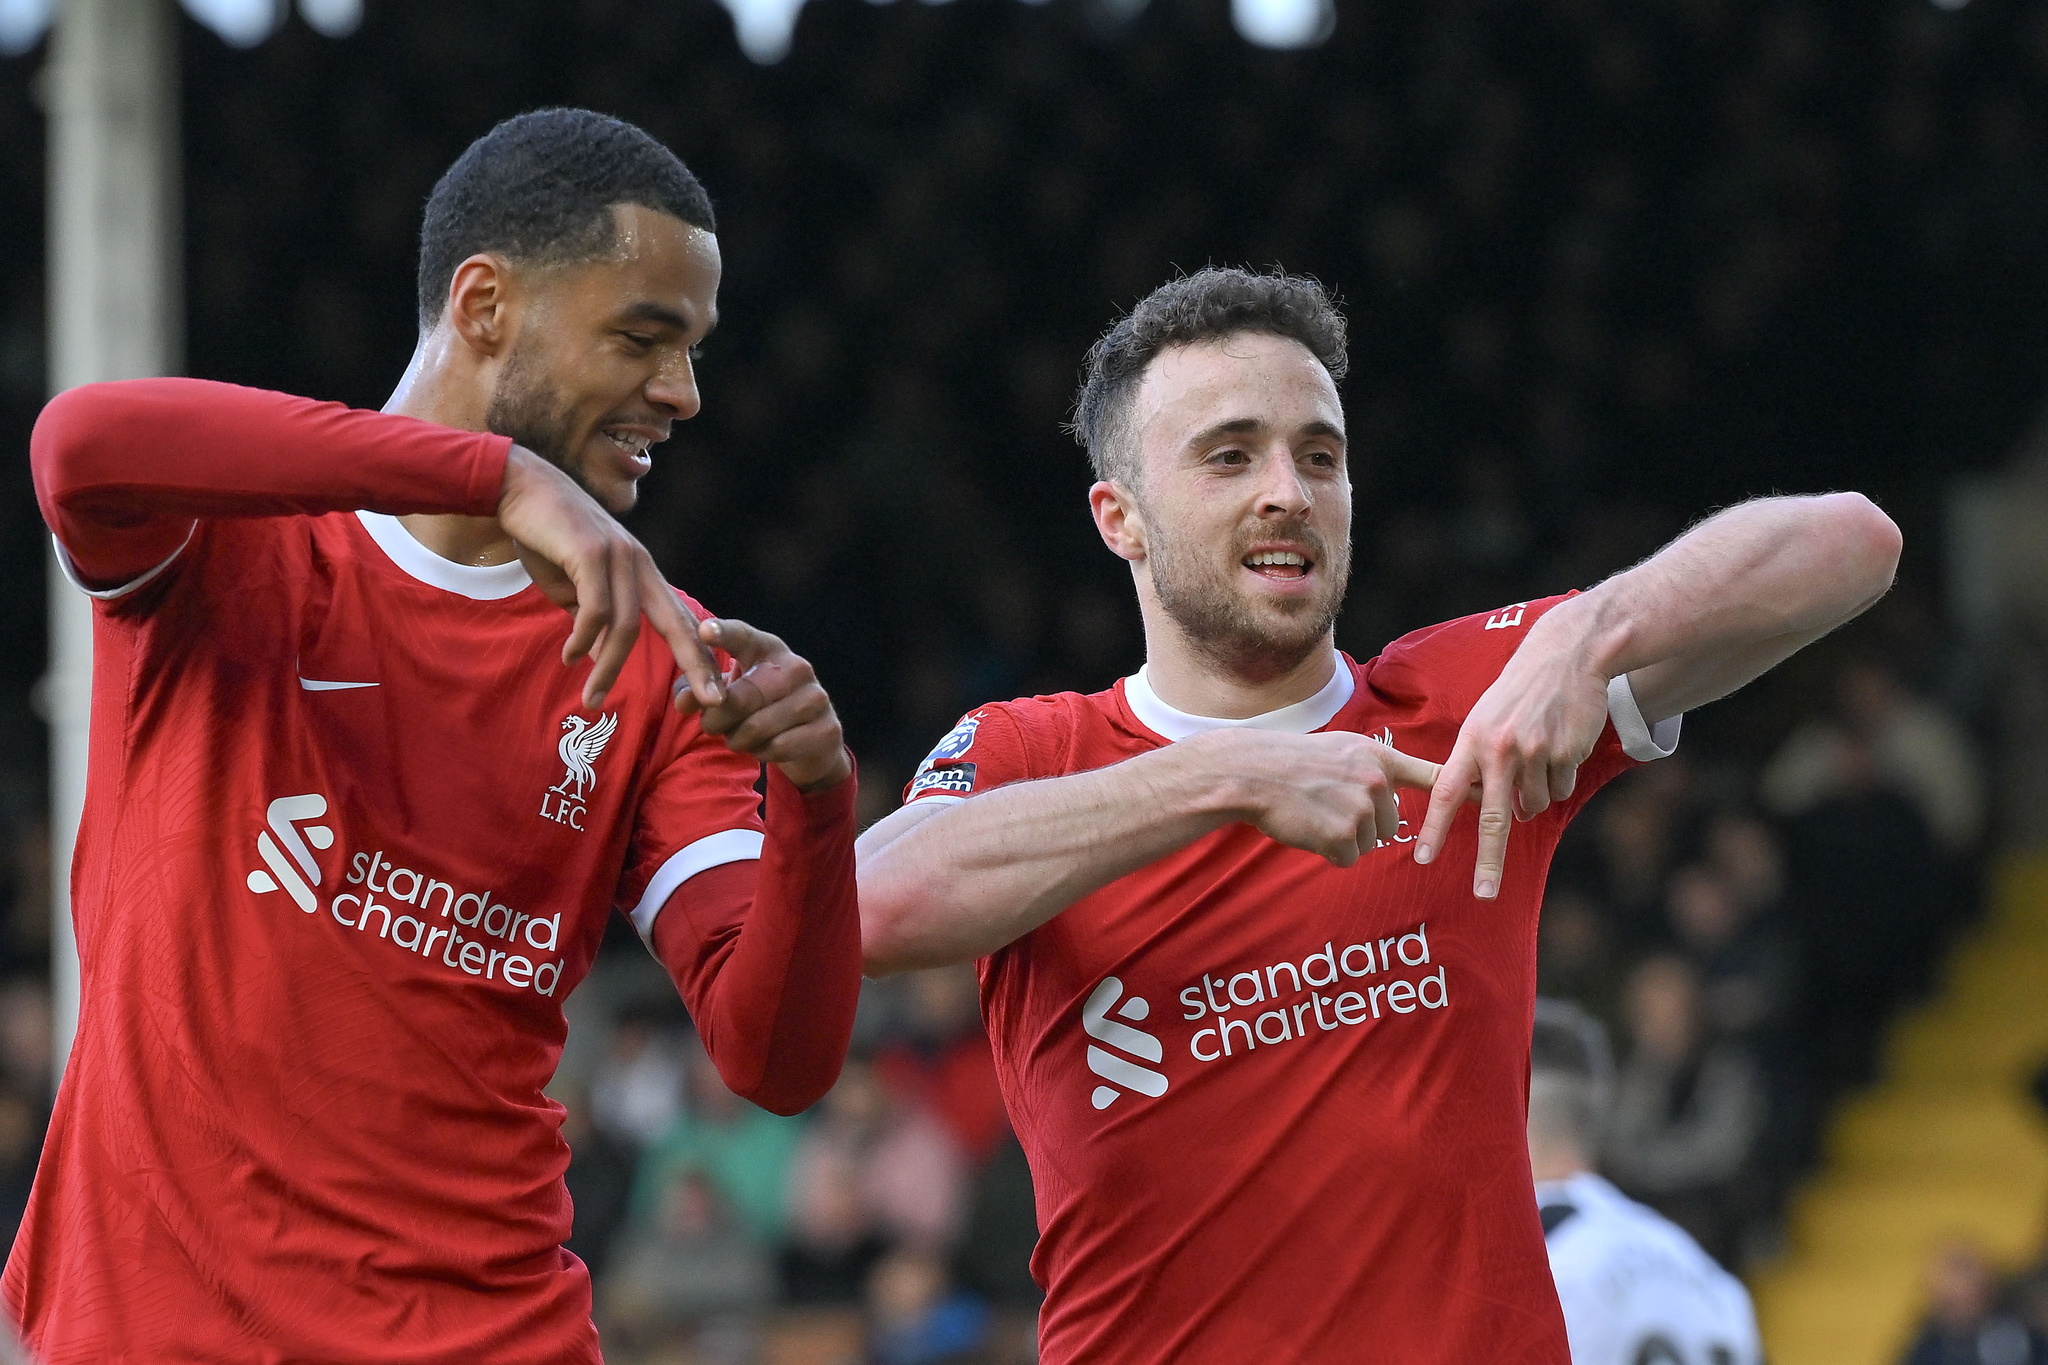 Diogo Jota celebrates after scoring with Cody Gakpo